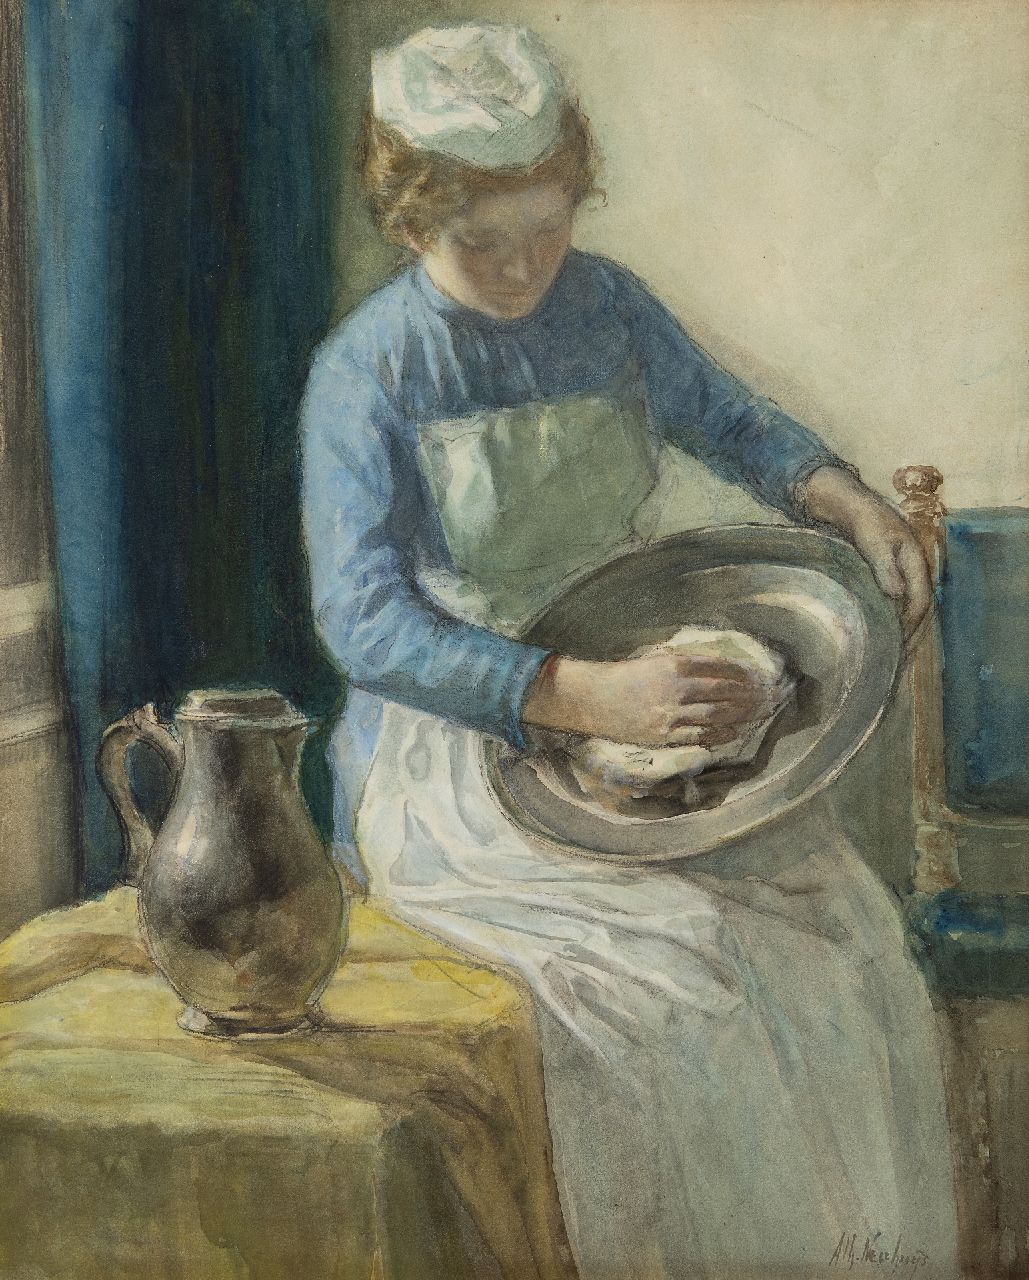 Neuhuys J.A.  | Johannes 'Albert' Neuhuys | Watercolours and drawings offered for sale | Polishing the tin bowl, crayon and watercolour on paper 55.3 x 44.7 cm, signed l.r.